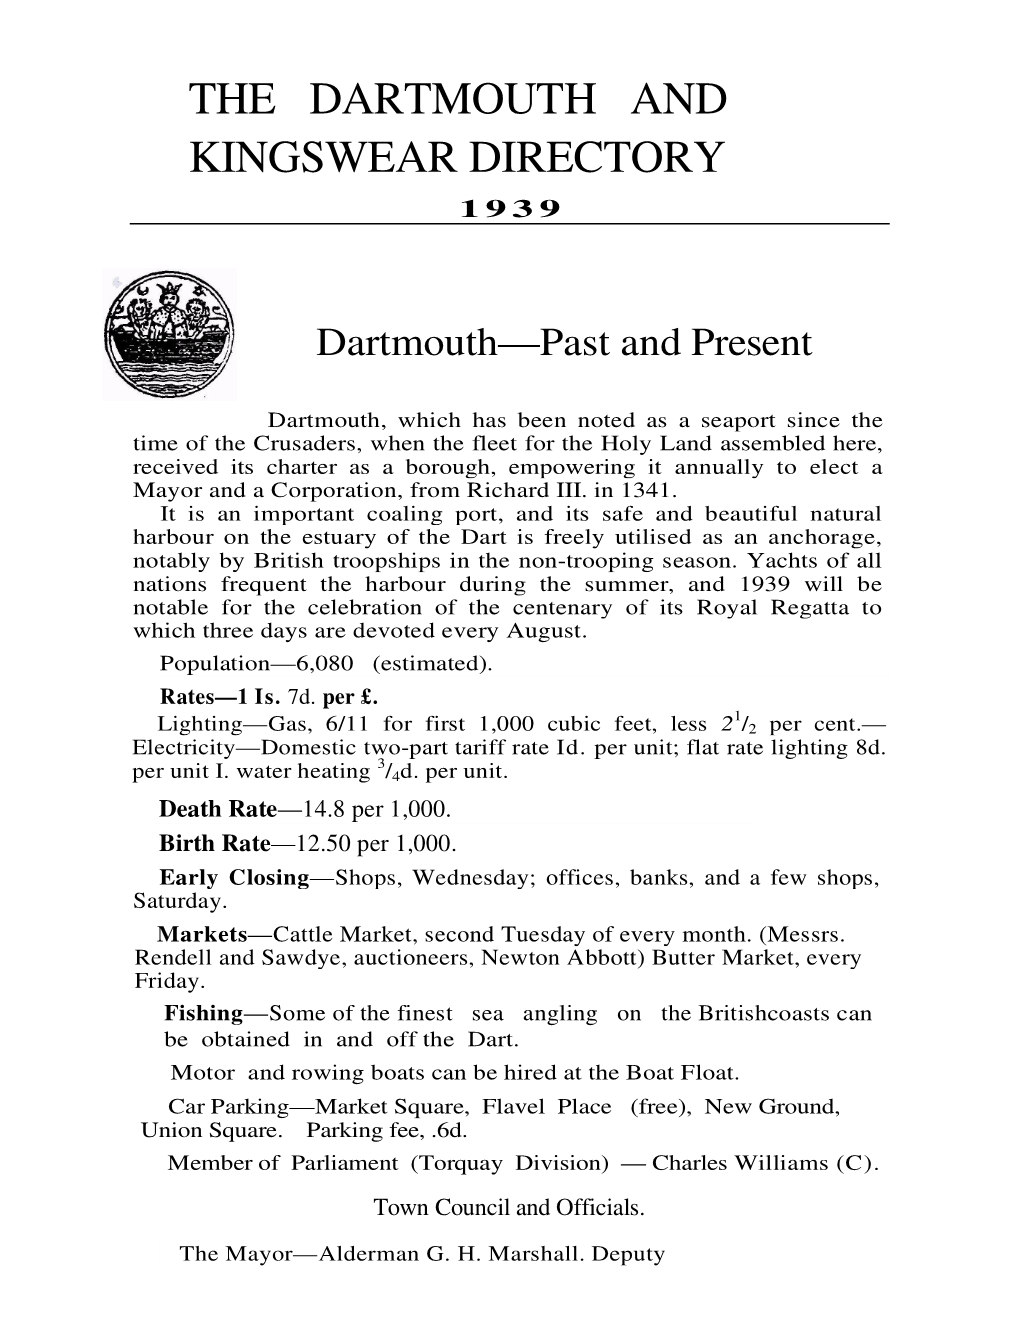 The Dartmouth and Kingswear Directory